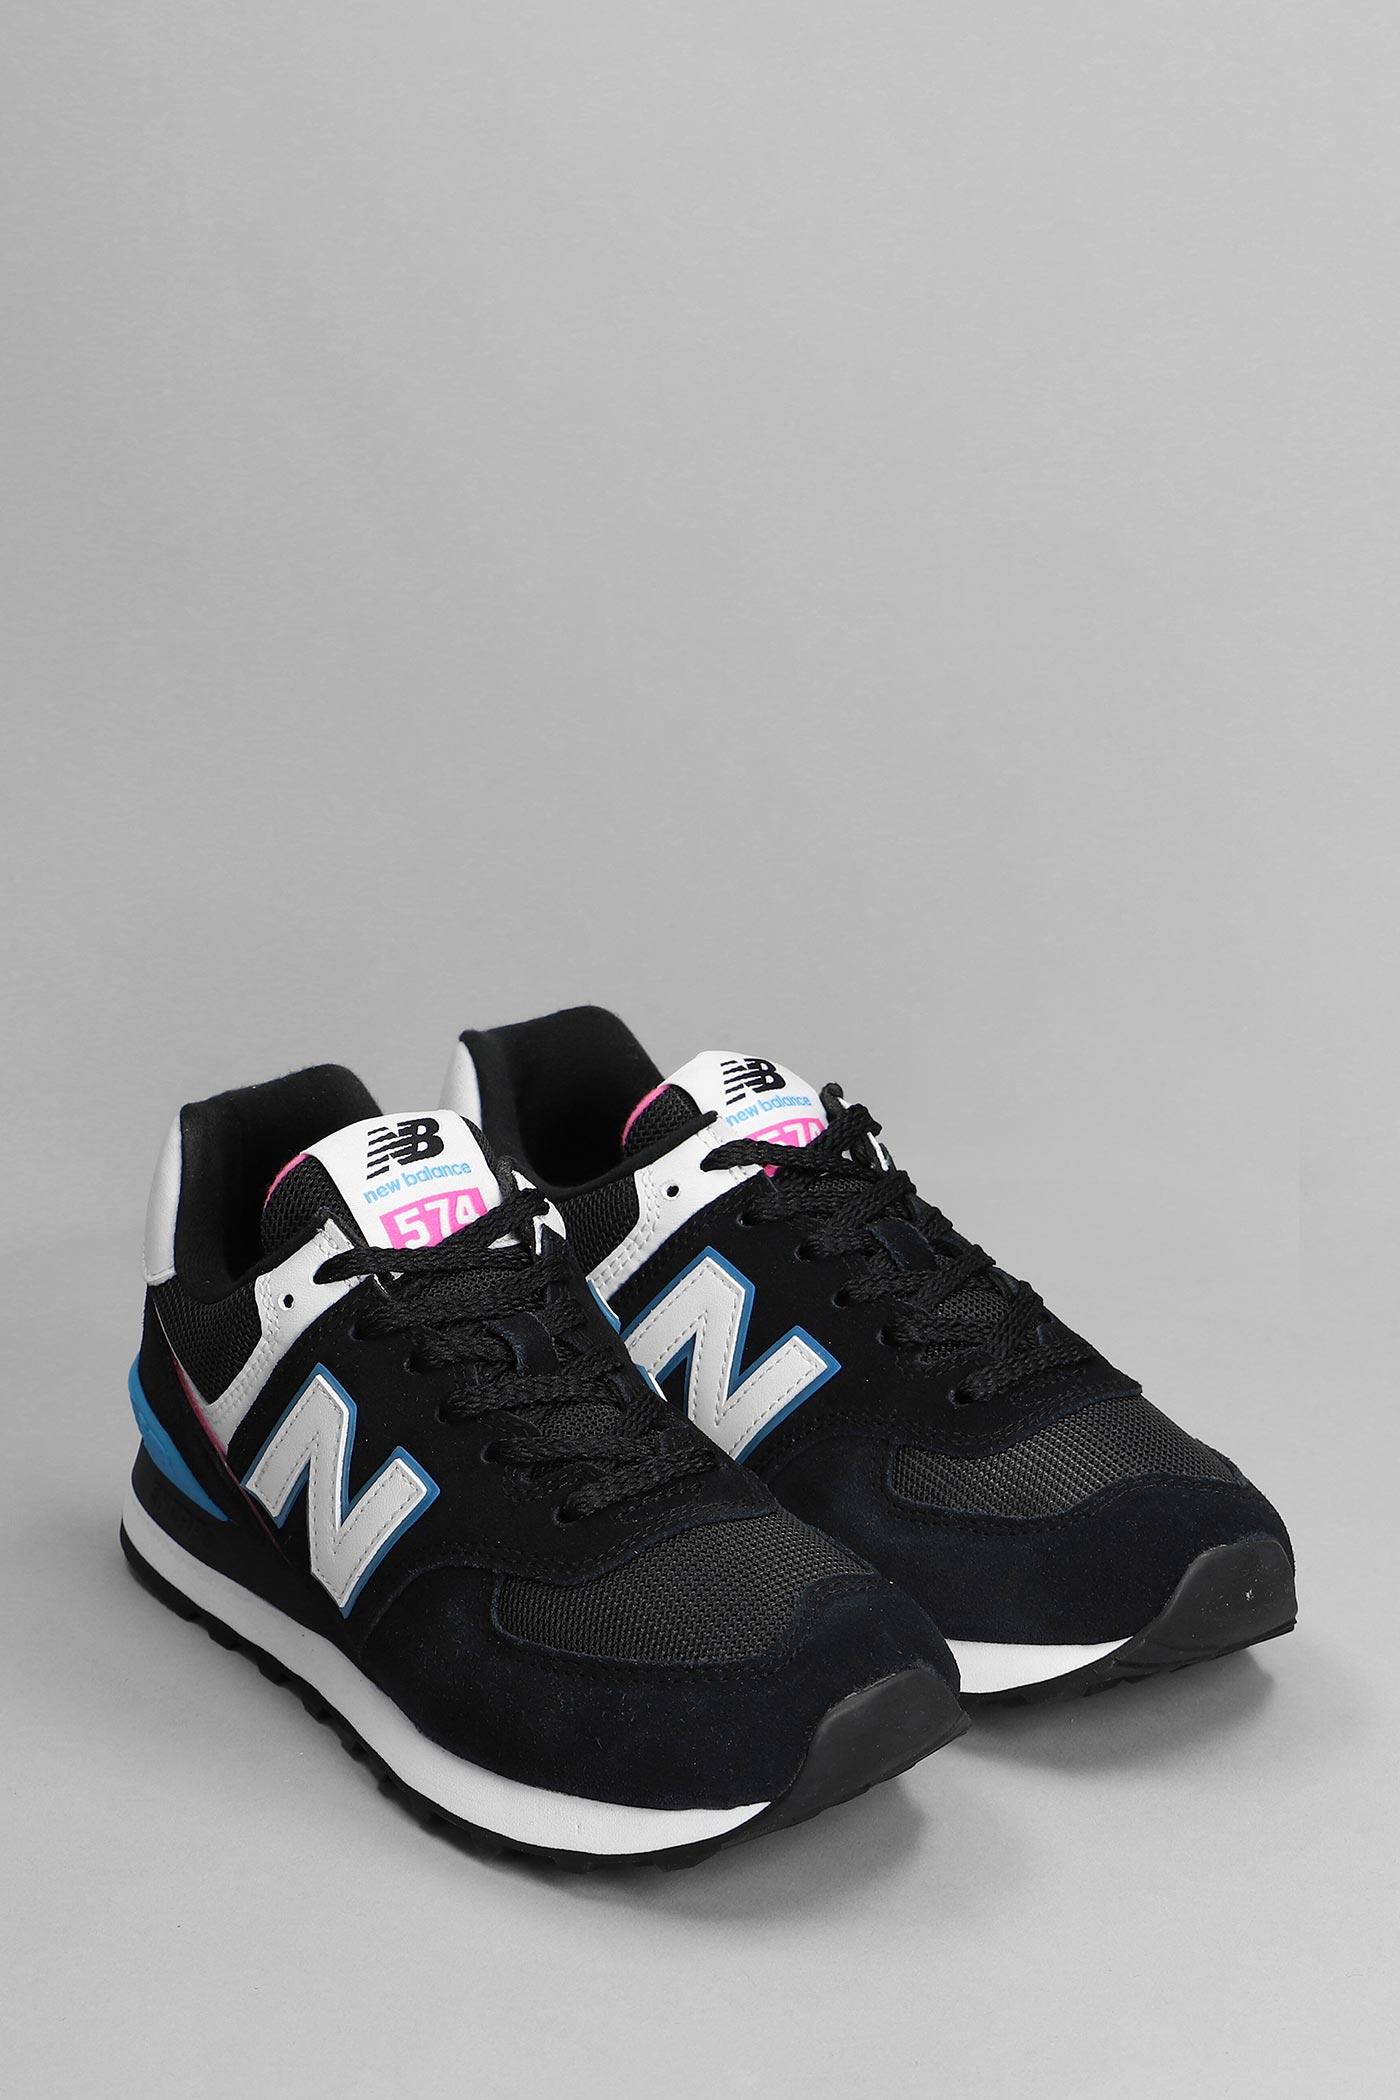 New Balance 574 Sneakers In Suede And Fabric in Black (Gray) - Save 54% |  Lyst